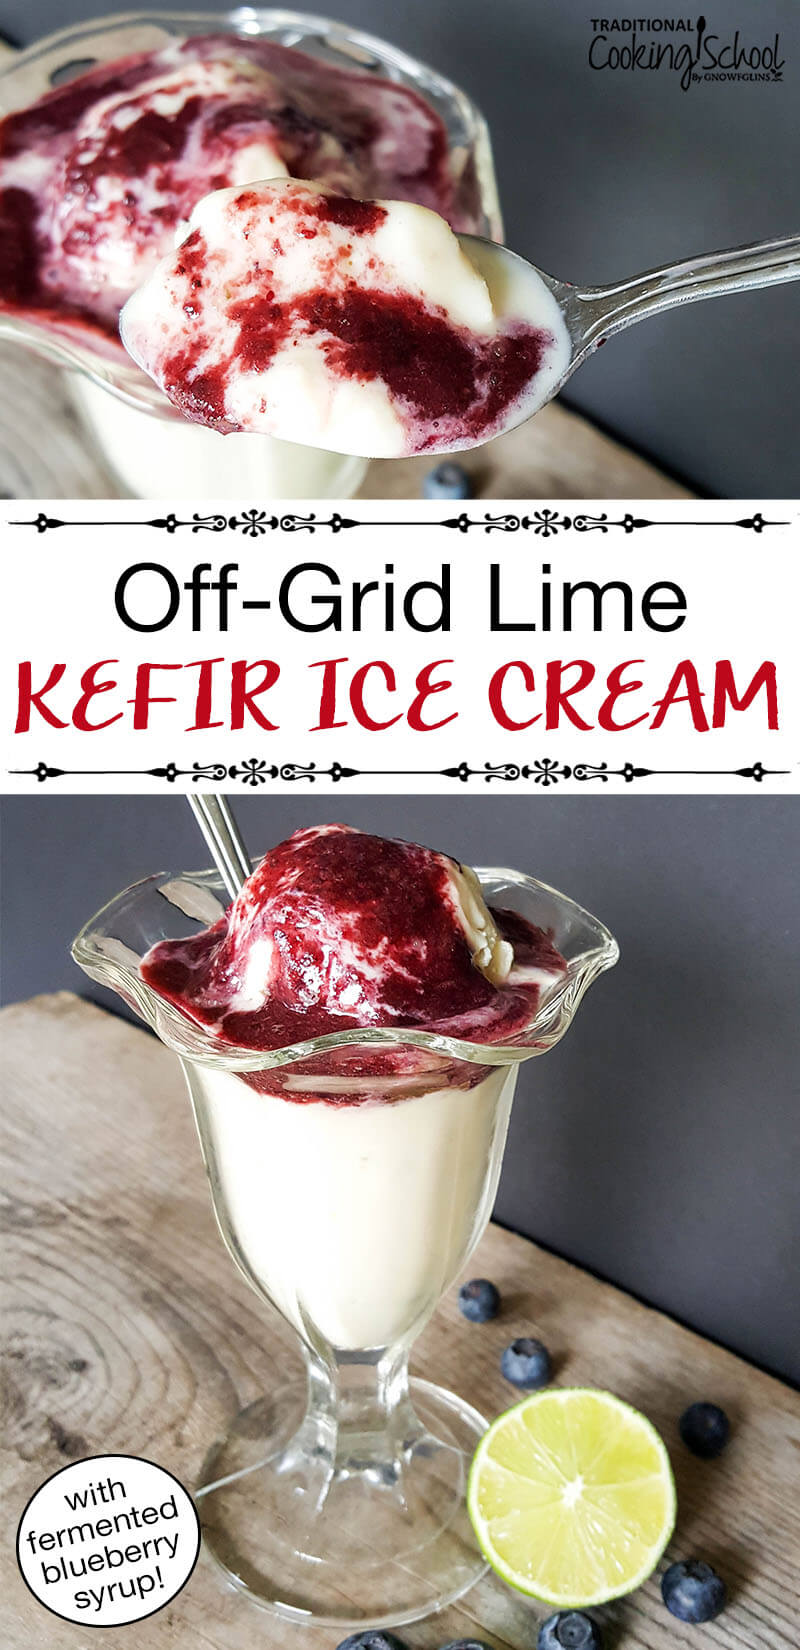 Can you eat ice cream anywhere, anytime? Make your guts happy with this homemade, no-churn, probiotic kefir ice cream with fermented blueberry sauce! No ice cream maker required -- the kids can do all the "churning" for you! [by Dawn Yoder]